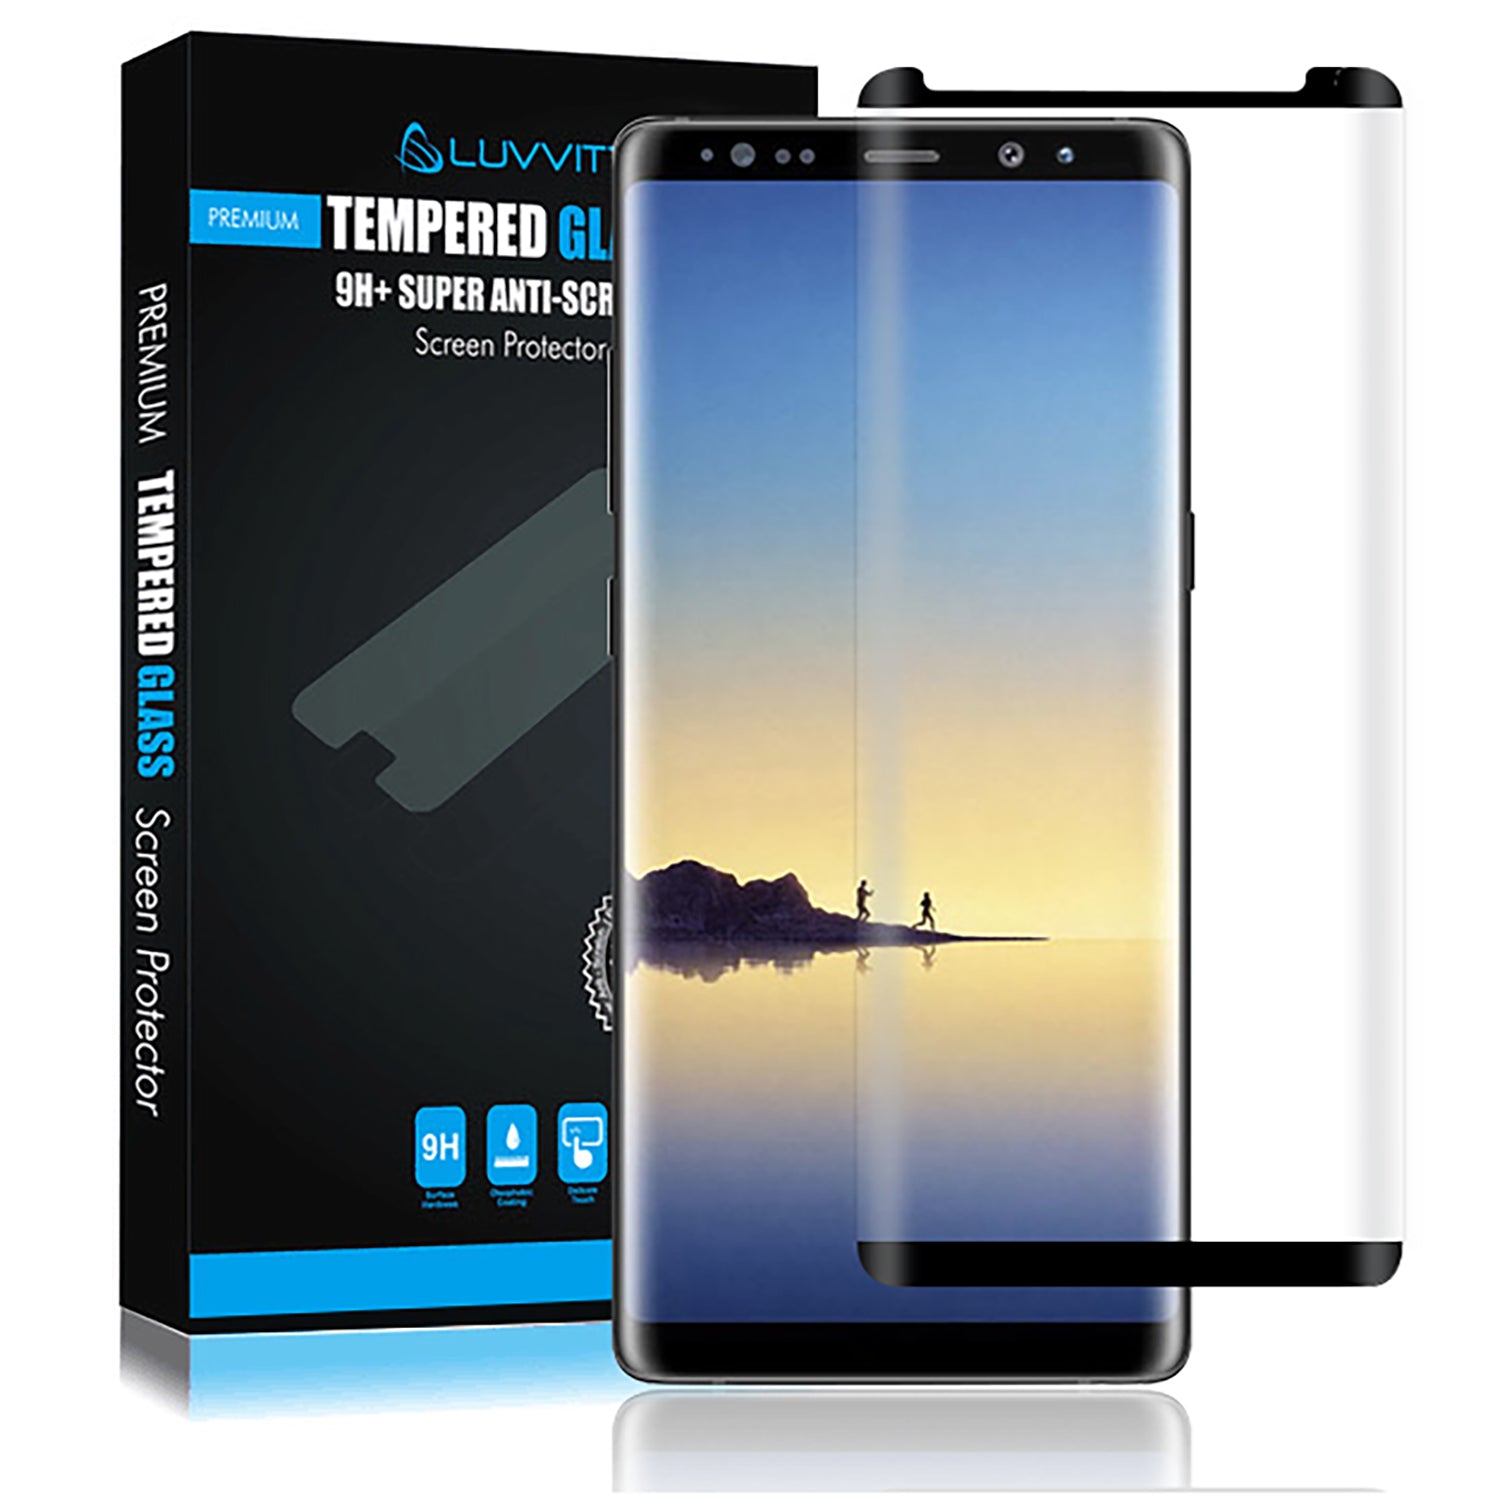 LUVVITT TEMPERED GLASS Screen Protector ( Case Friendly ) for Galaxy Note 8 - Black